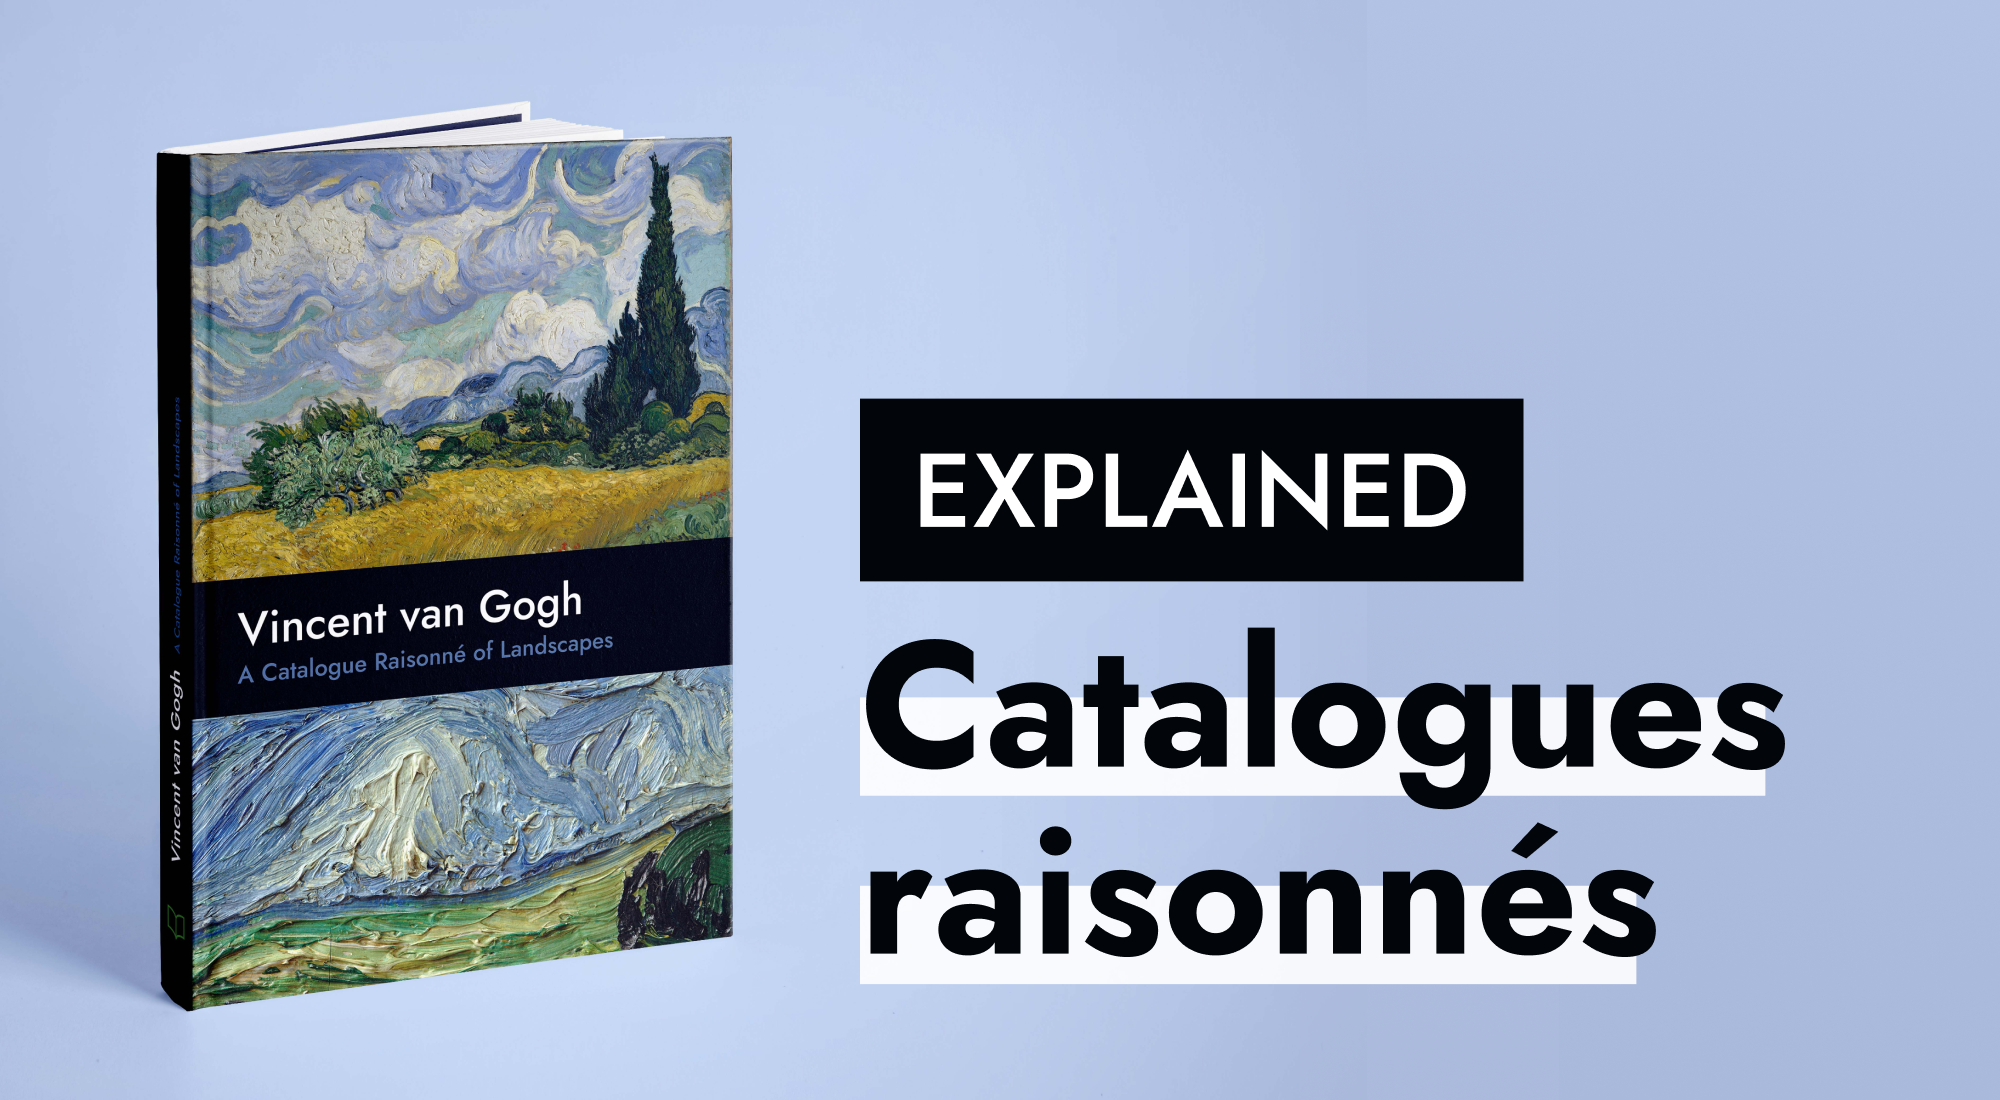 Image of a catalogue raisonné with Van Gogh image on its cover and text 